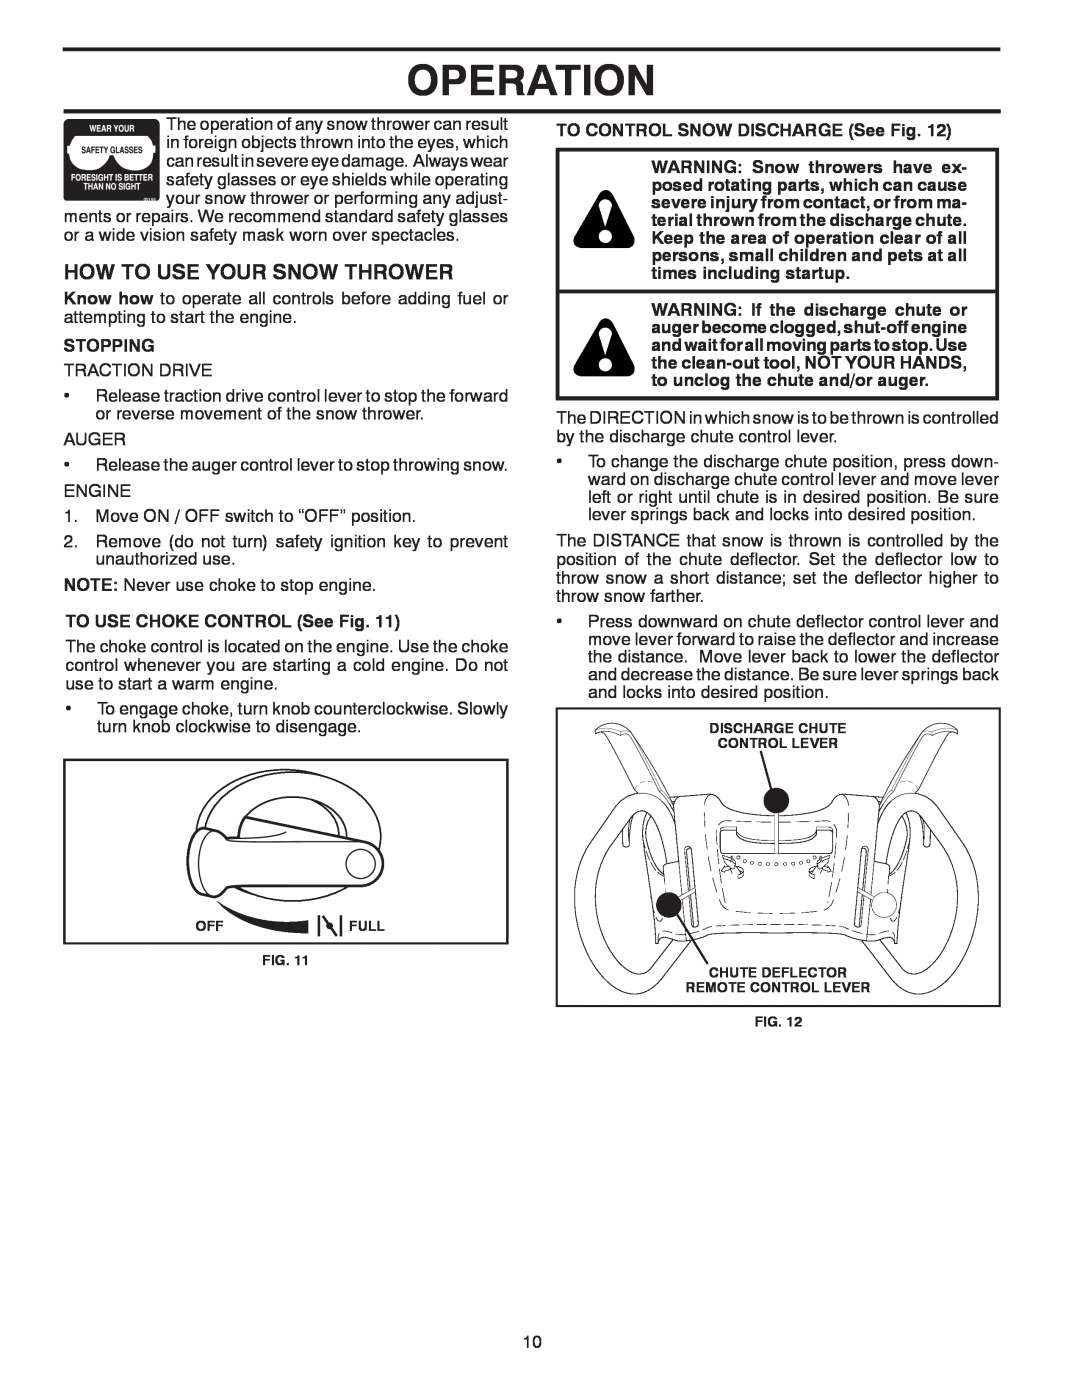 Poulan 436134, 96192004300 owner manual How To Use Your Snow Thrower, Operation, Stopping, TO USE CHOKE CONTROL See Fig 